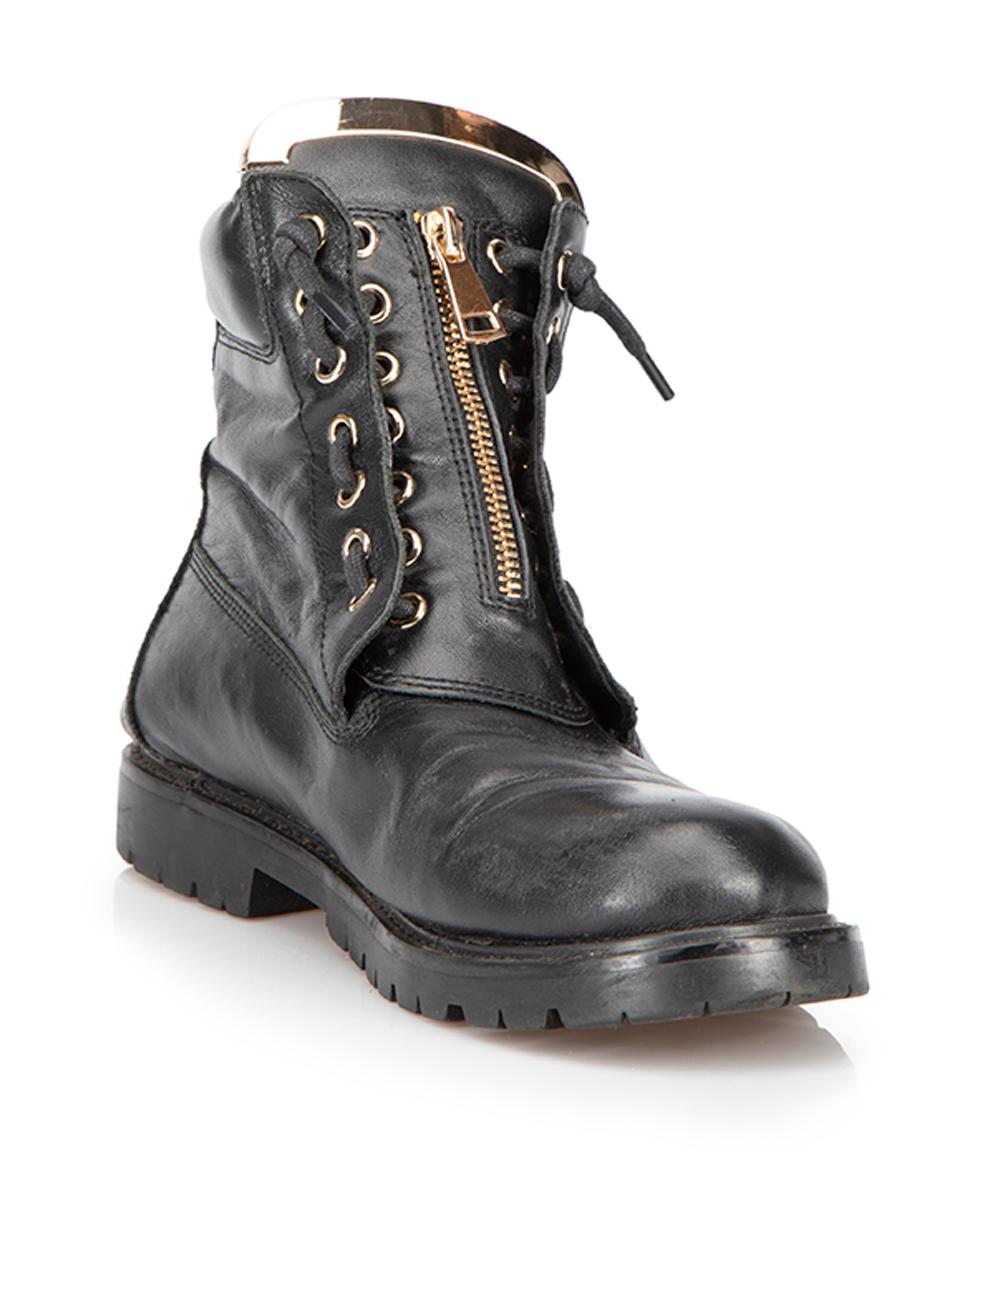 CONDITION is Good. Minor wear to boots is evident. Light wear to the leather exterior where scuffs and scratches can be seen. There is also visible creasing to the vamp on this used Balmain designer resale item. 
 
 Details
  Black
 Leather
 Combat